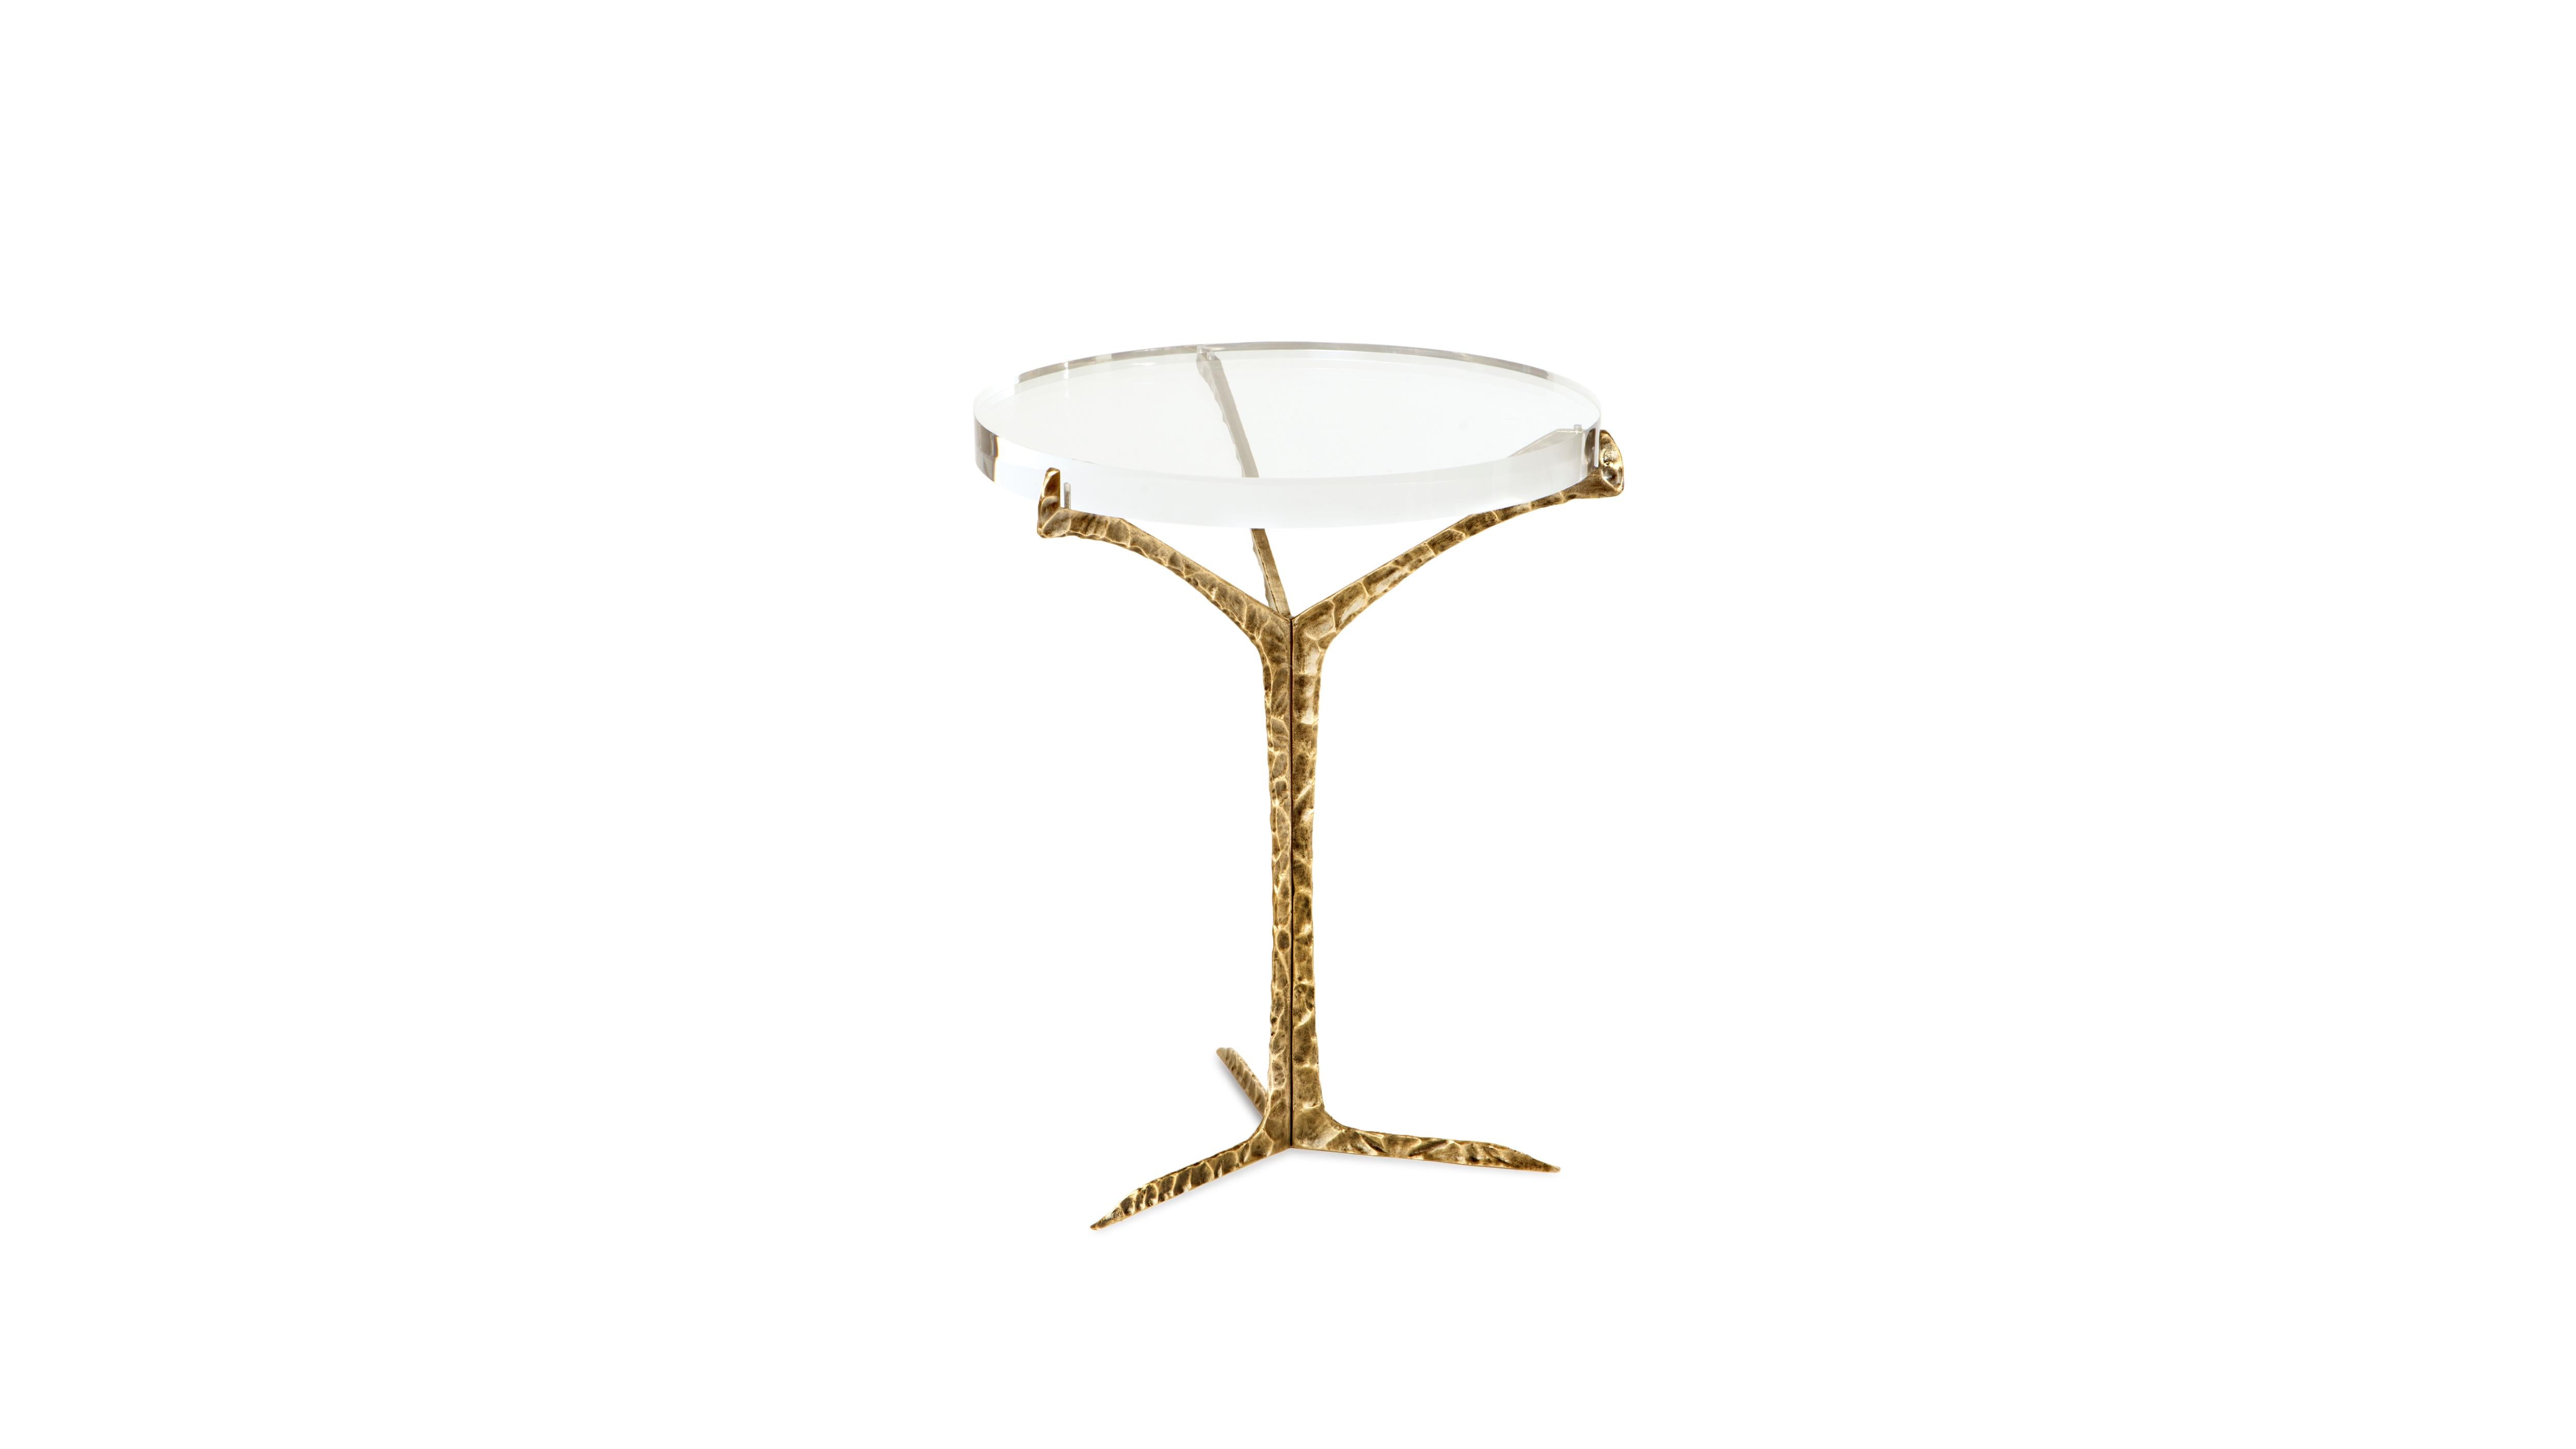 Alentejo Acrylic Side Table by InsidherLand
Dimensions: D 49 x W 49 x H 60 cm.
Materials: Acrylic, cast brass with patinated effect.
11 kg.
Other materials available.

Alentejo side table is a glimpse over the South of Portugal where thousands of